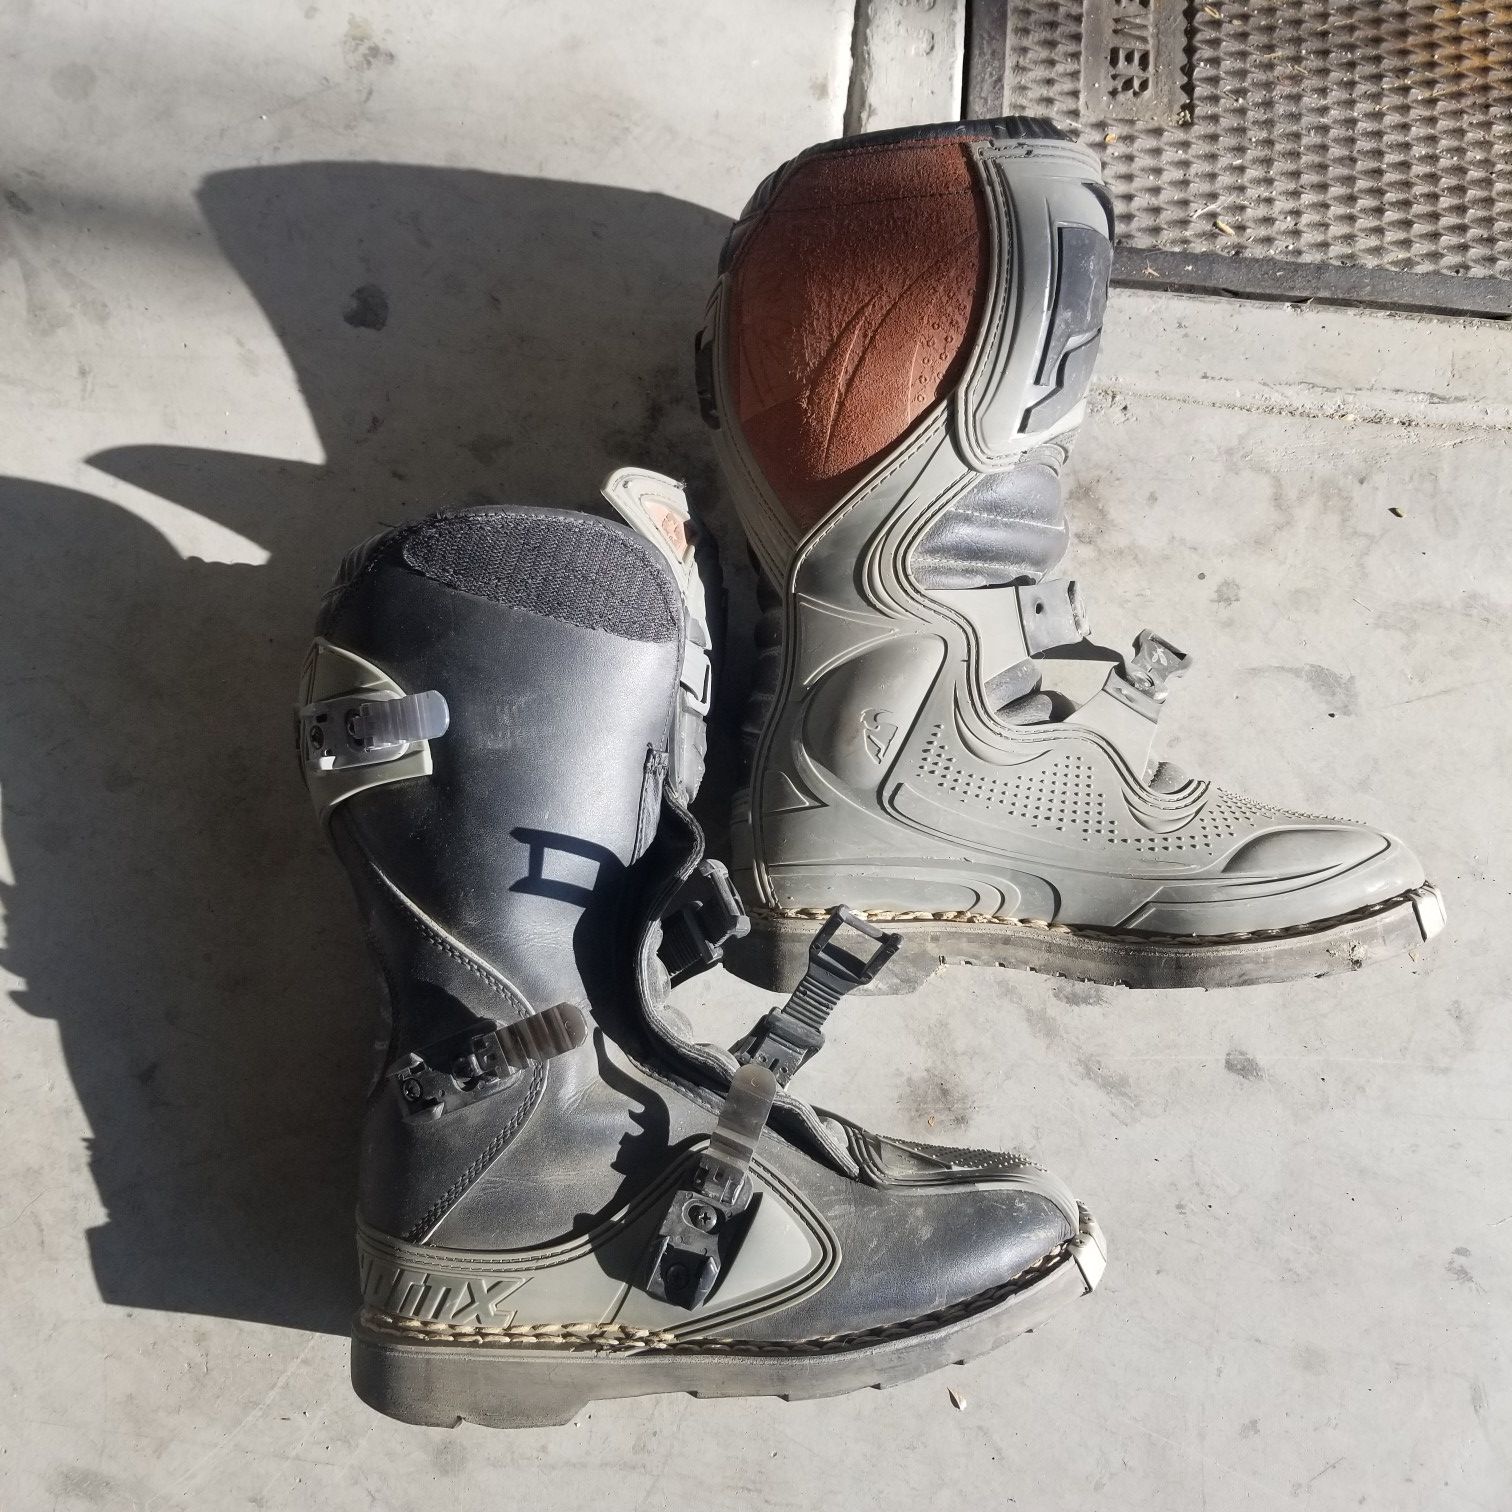 Thor size 6 dirt bike boots